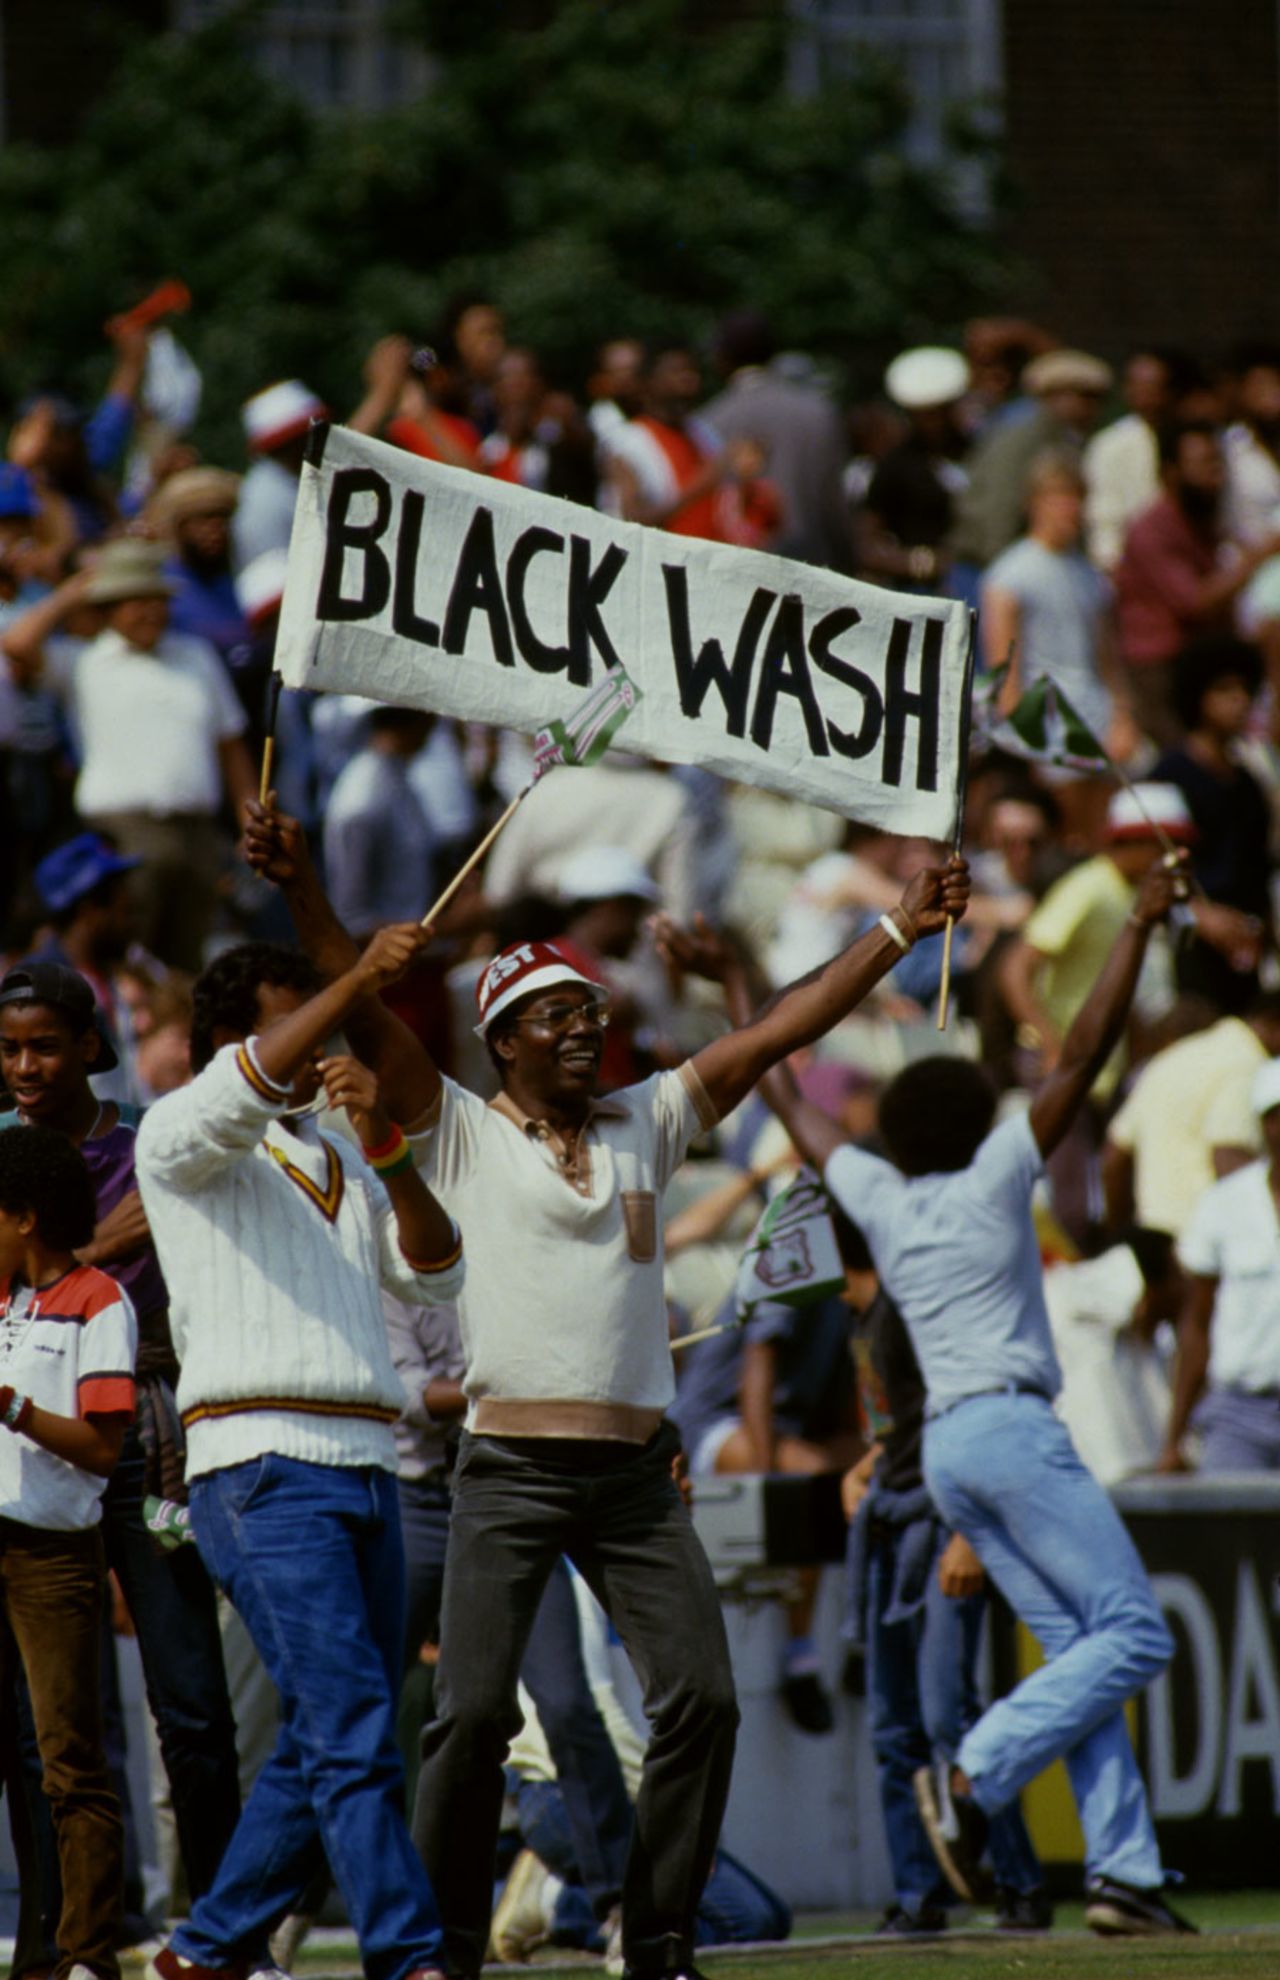 West Indian supporters hold up "black wash" posters, England v West Indies, 5th Test, The Oval, 5th day, August 14, 1984